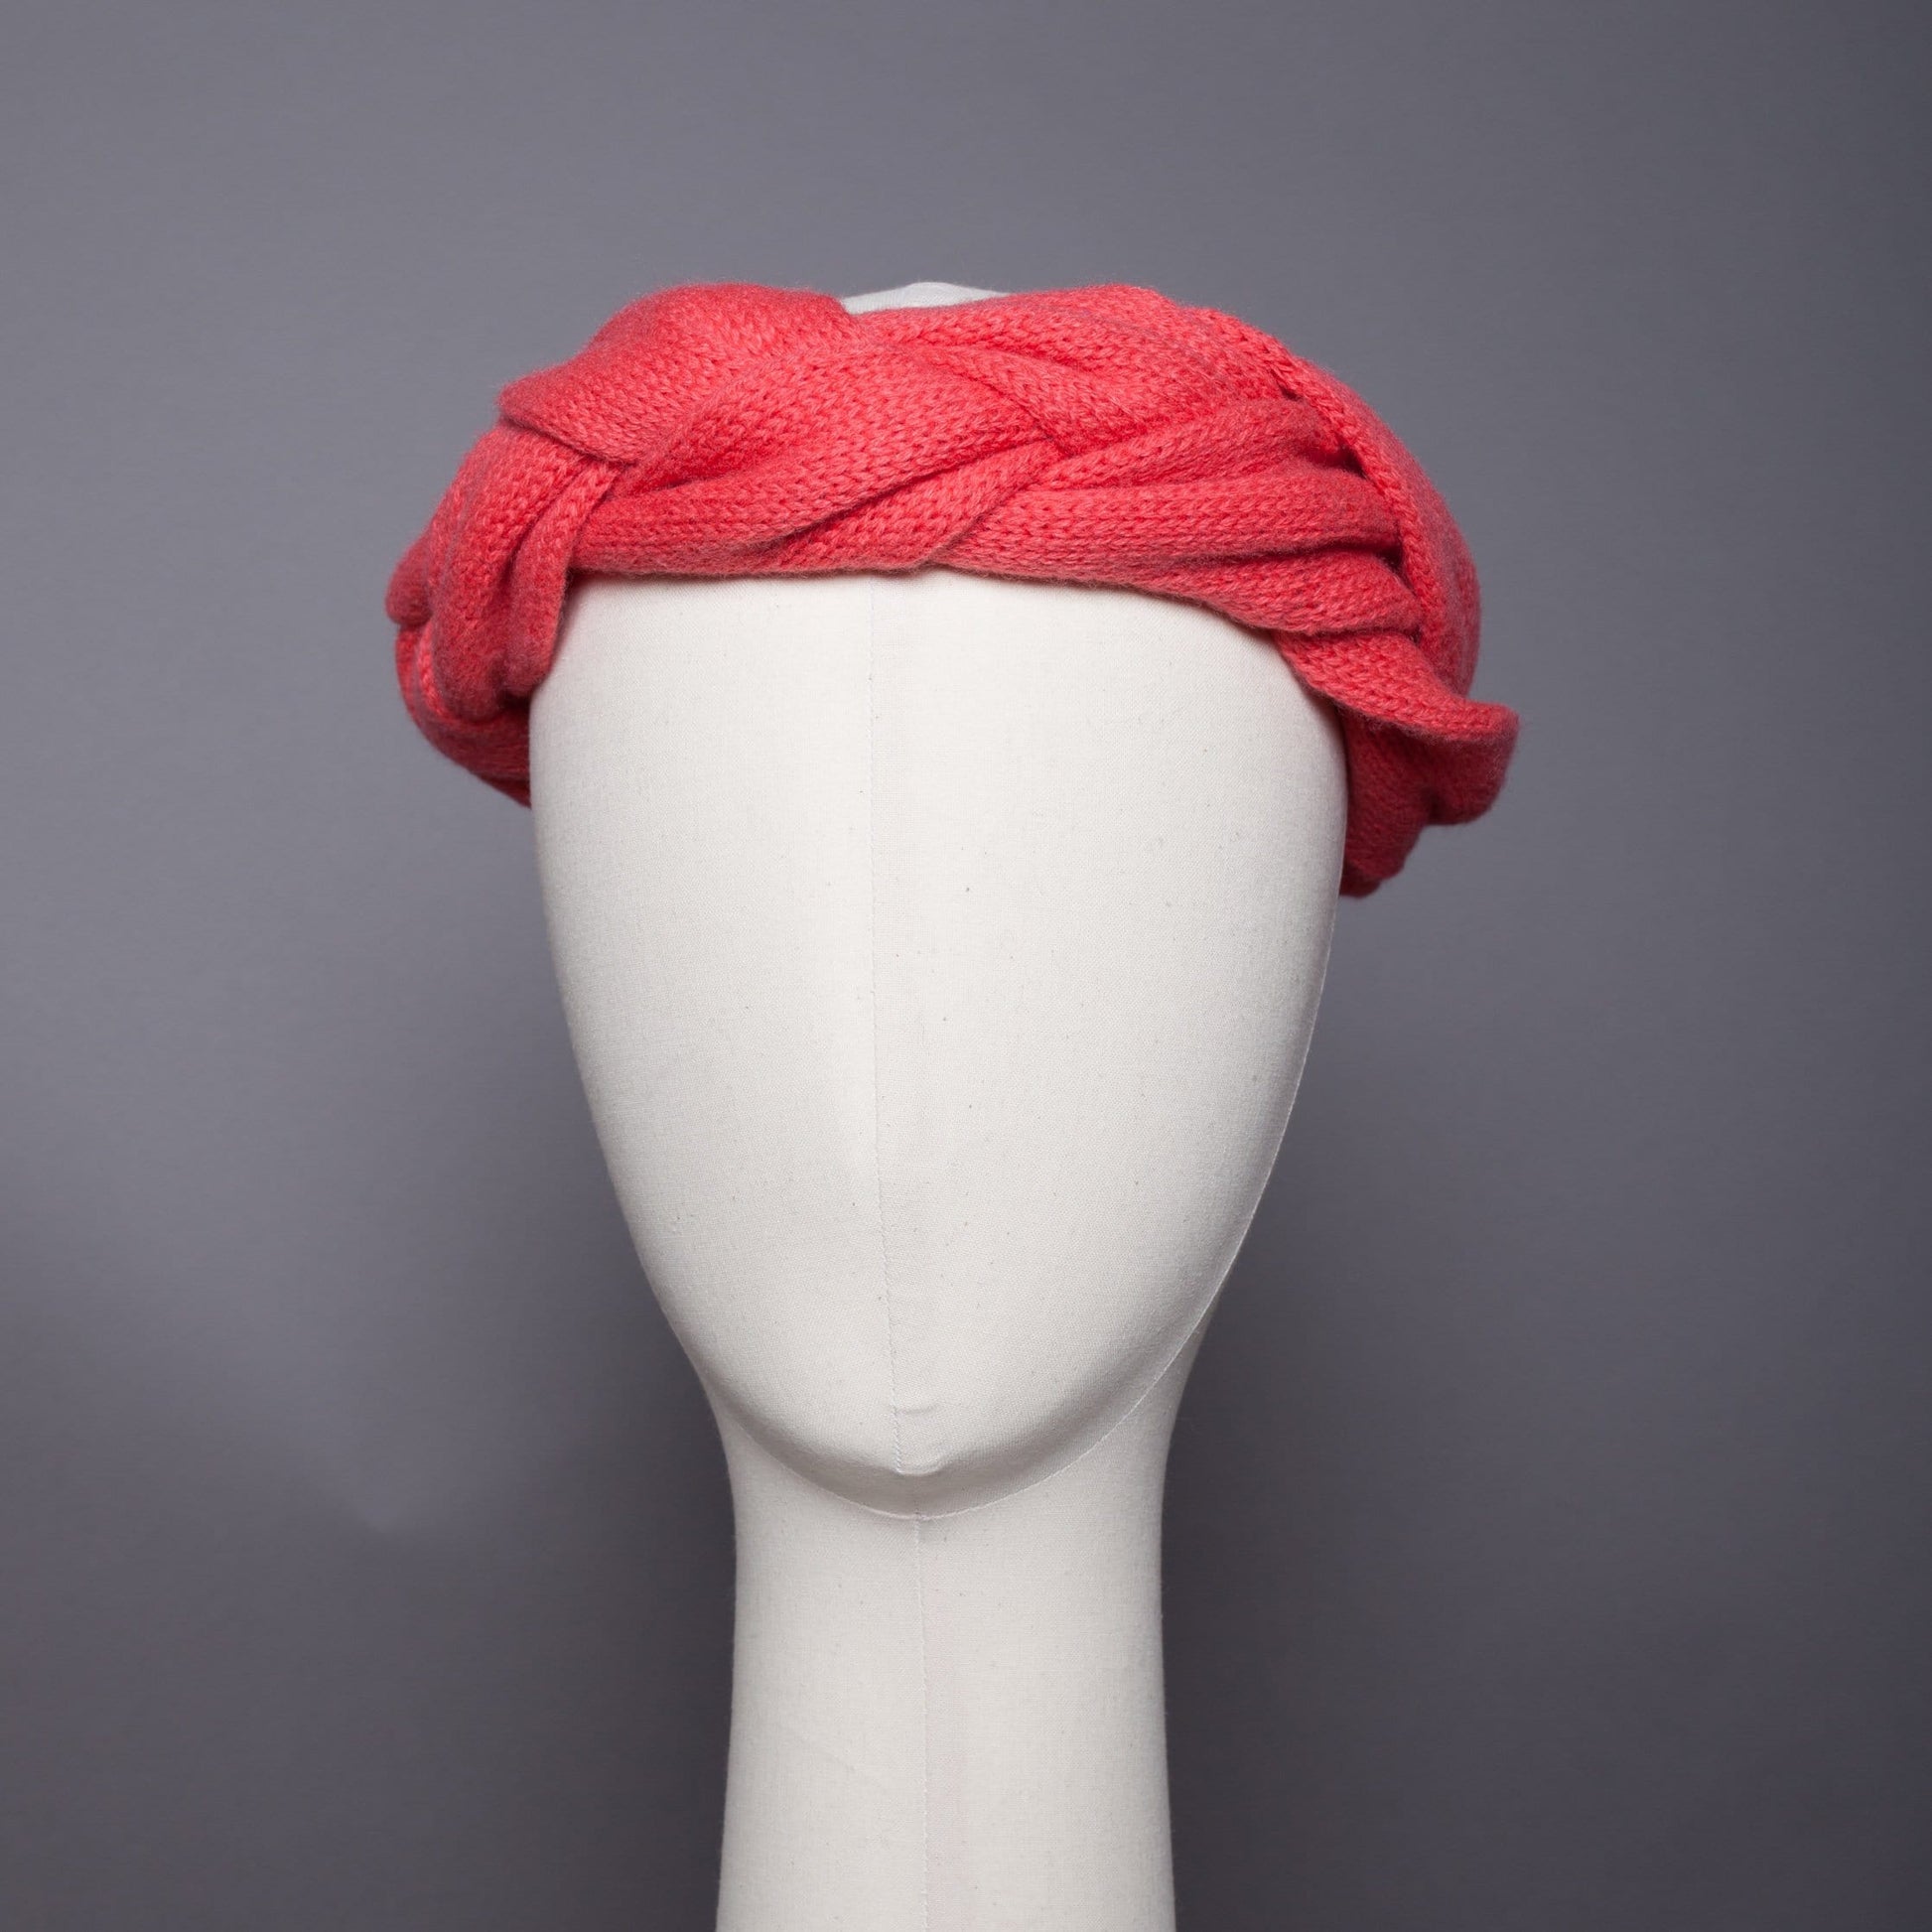 Headband tressé Evesome maille mousseuse 100% cachemire - Braided headband Evesome 100% cashmere frothy mesh